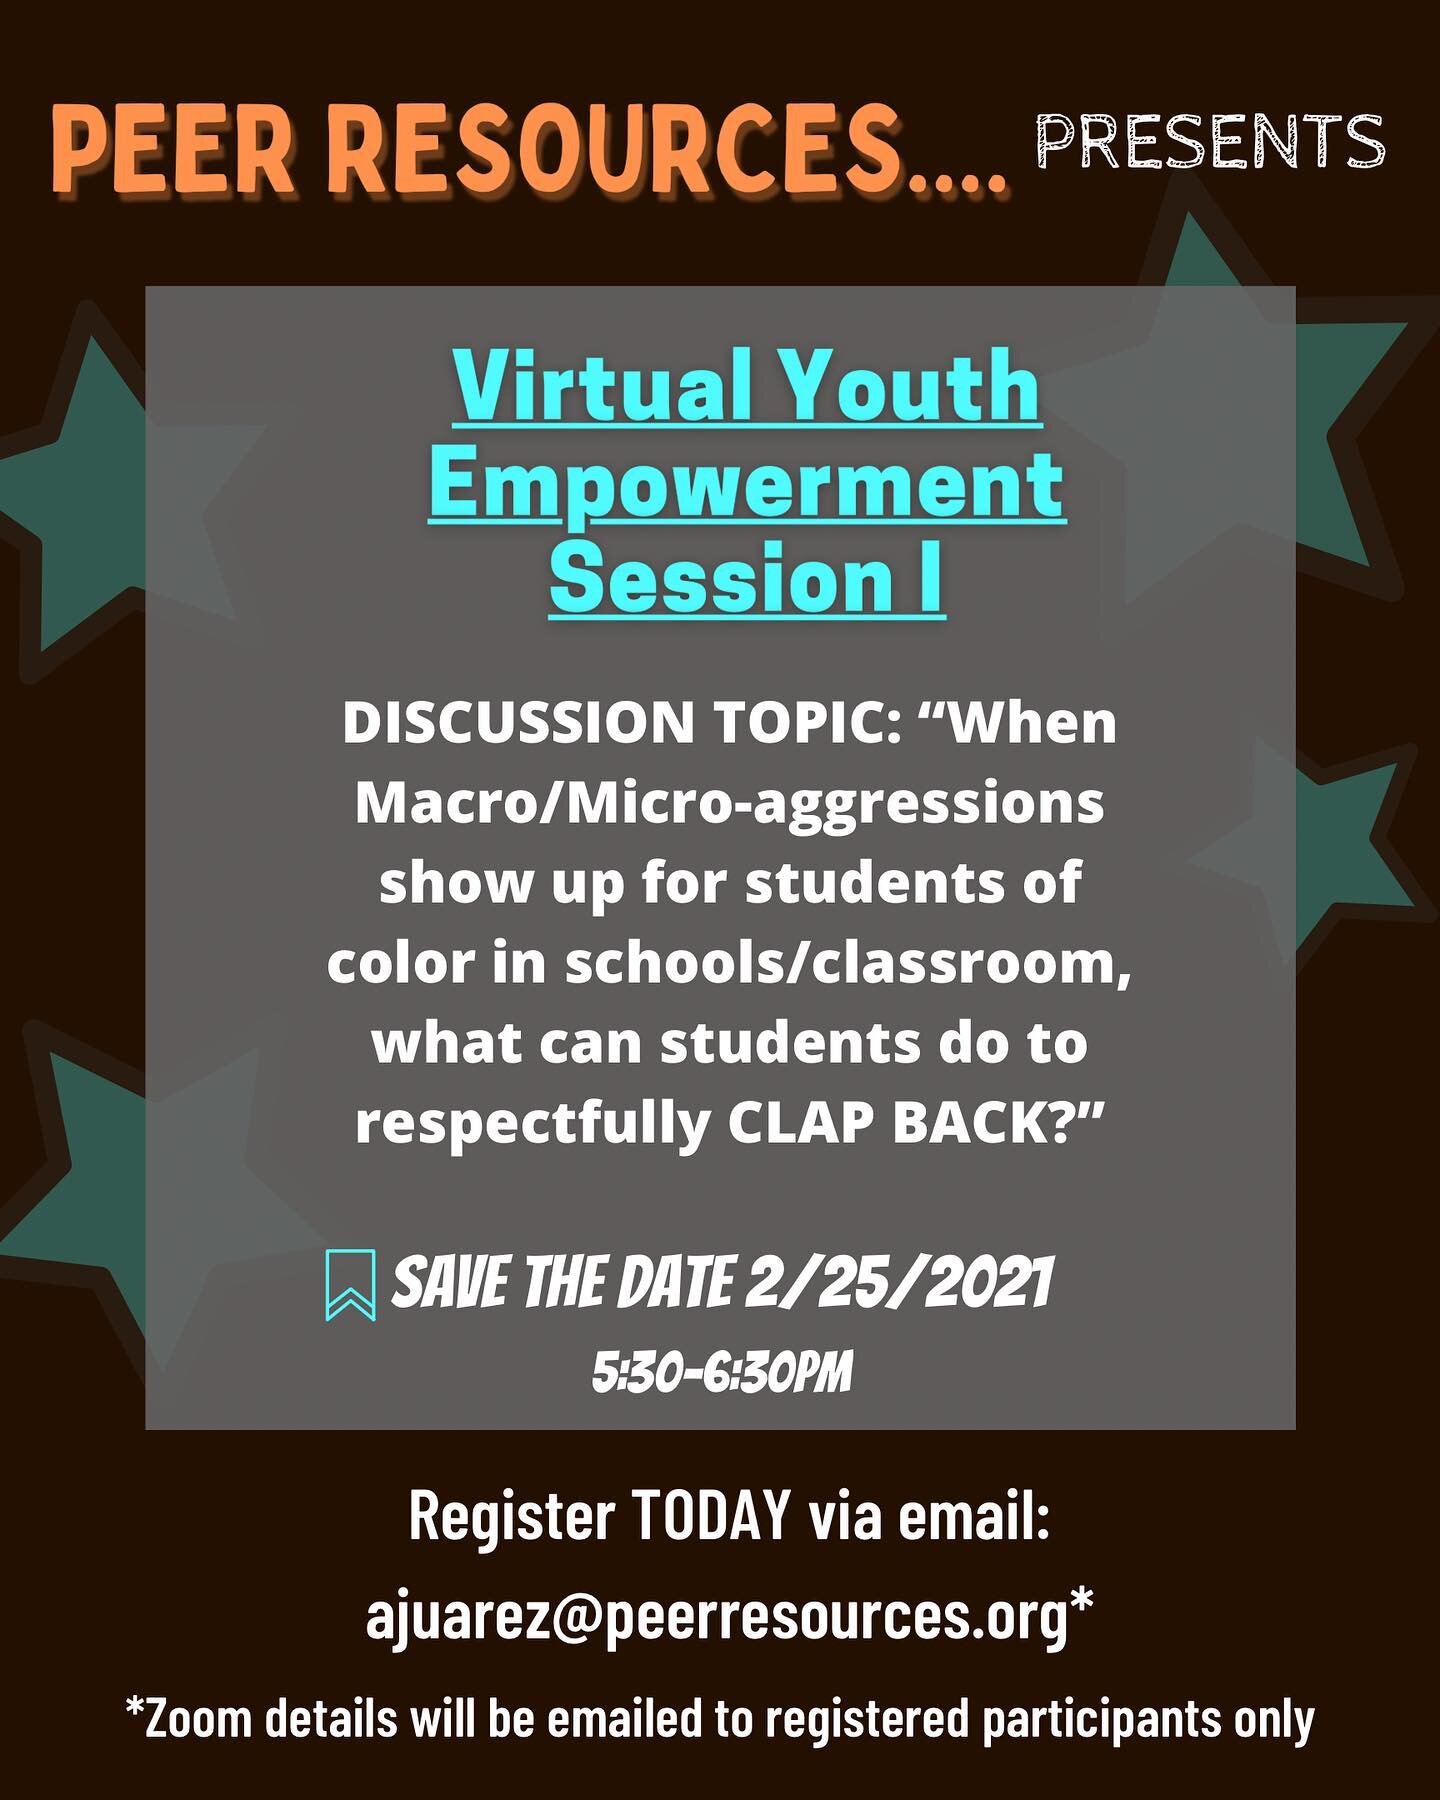 Happy Thursday Everyone ☀️😃!!!
&mdash;&mdash;
Today our Youth Council will be hosting this Virtual Youth Empowerment Session to discuss microaggressions. Please join us! If you are interested in joining please email: ajuarez@peerresources.org to reg